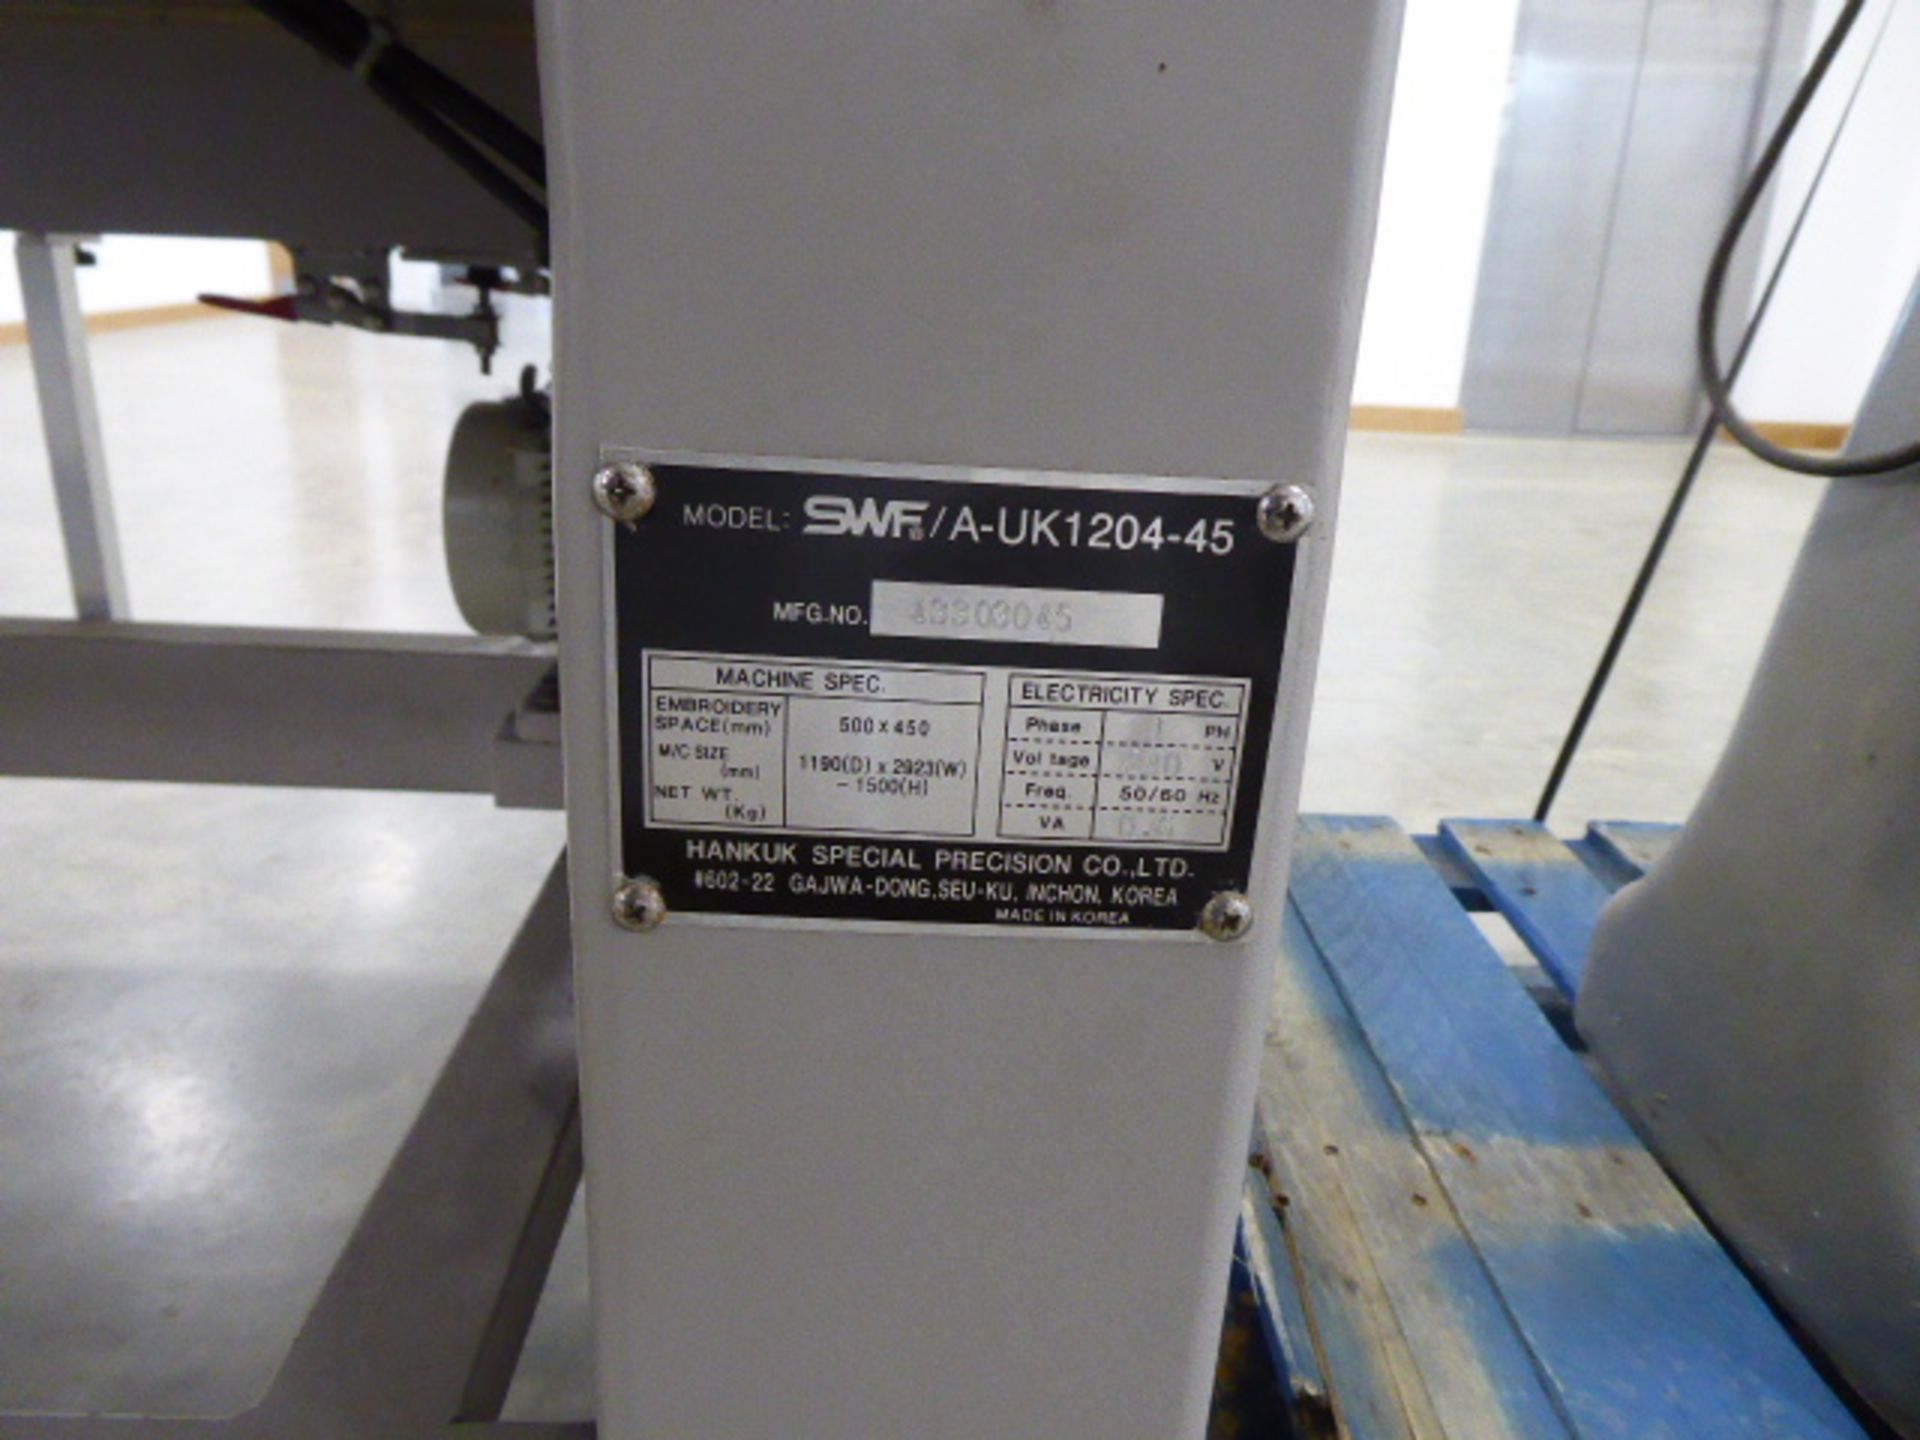 SWFA-UK 1204-45 4 head automatic electronic embroidering machine Serial Number: 4330345 with - Image 3 of 4